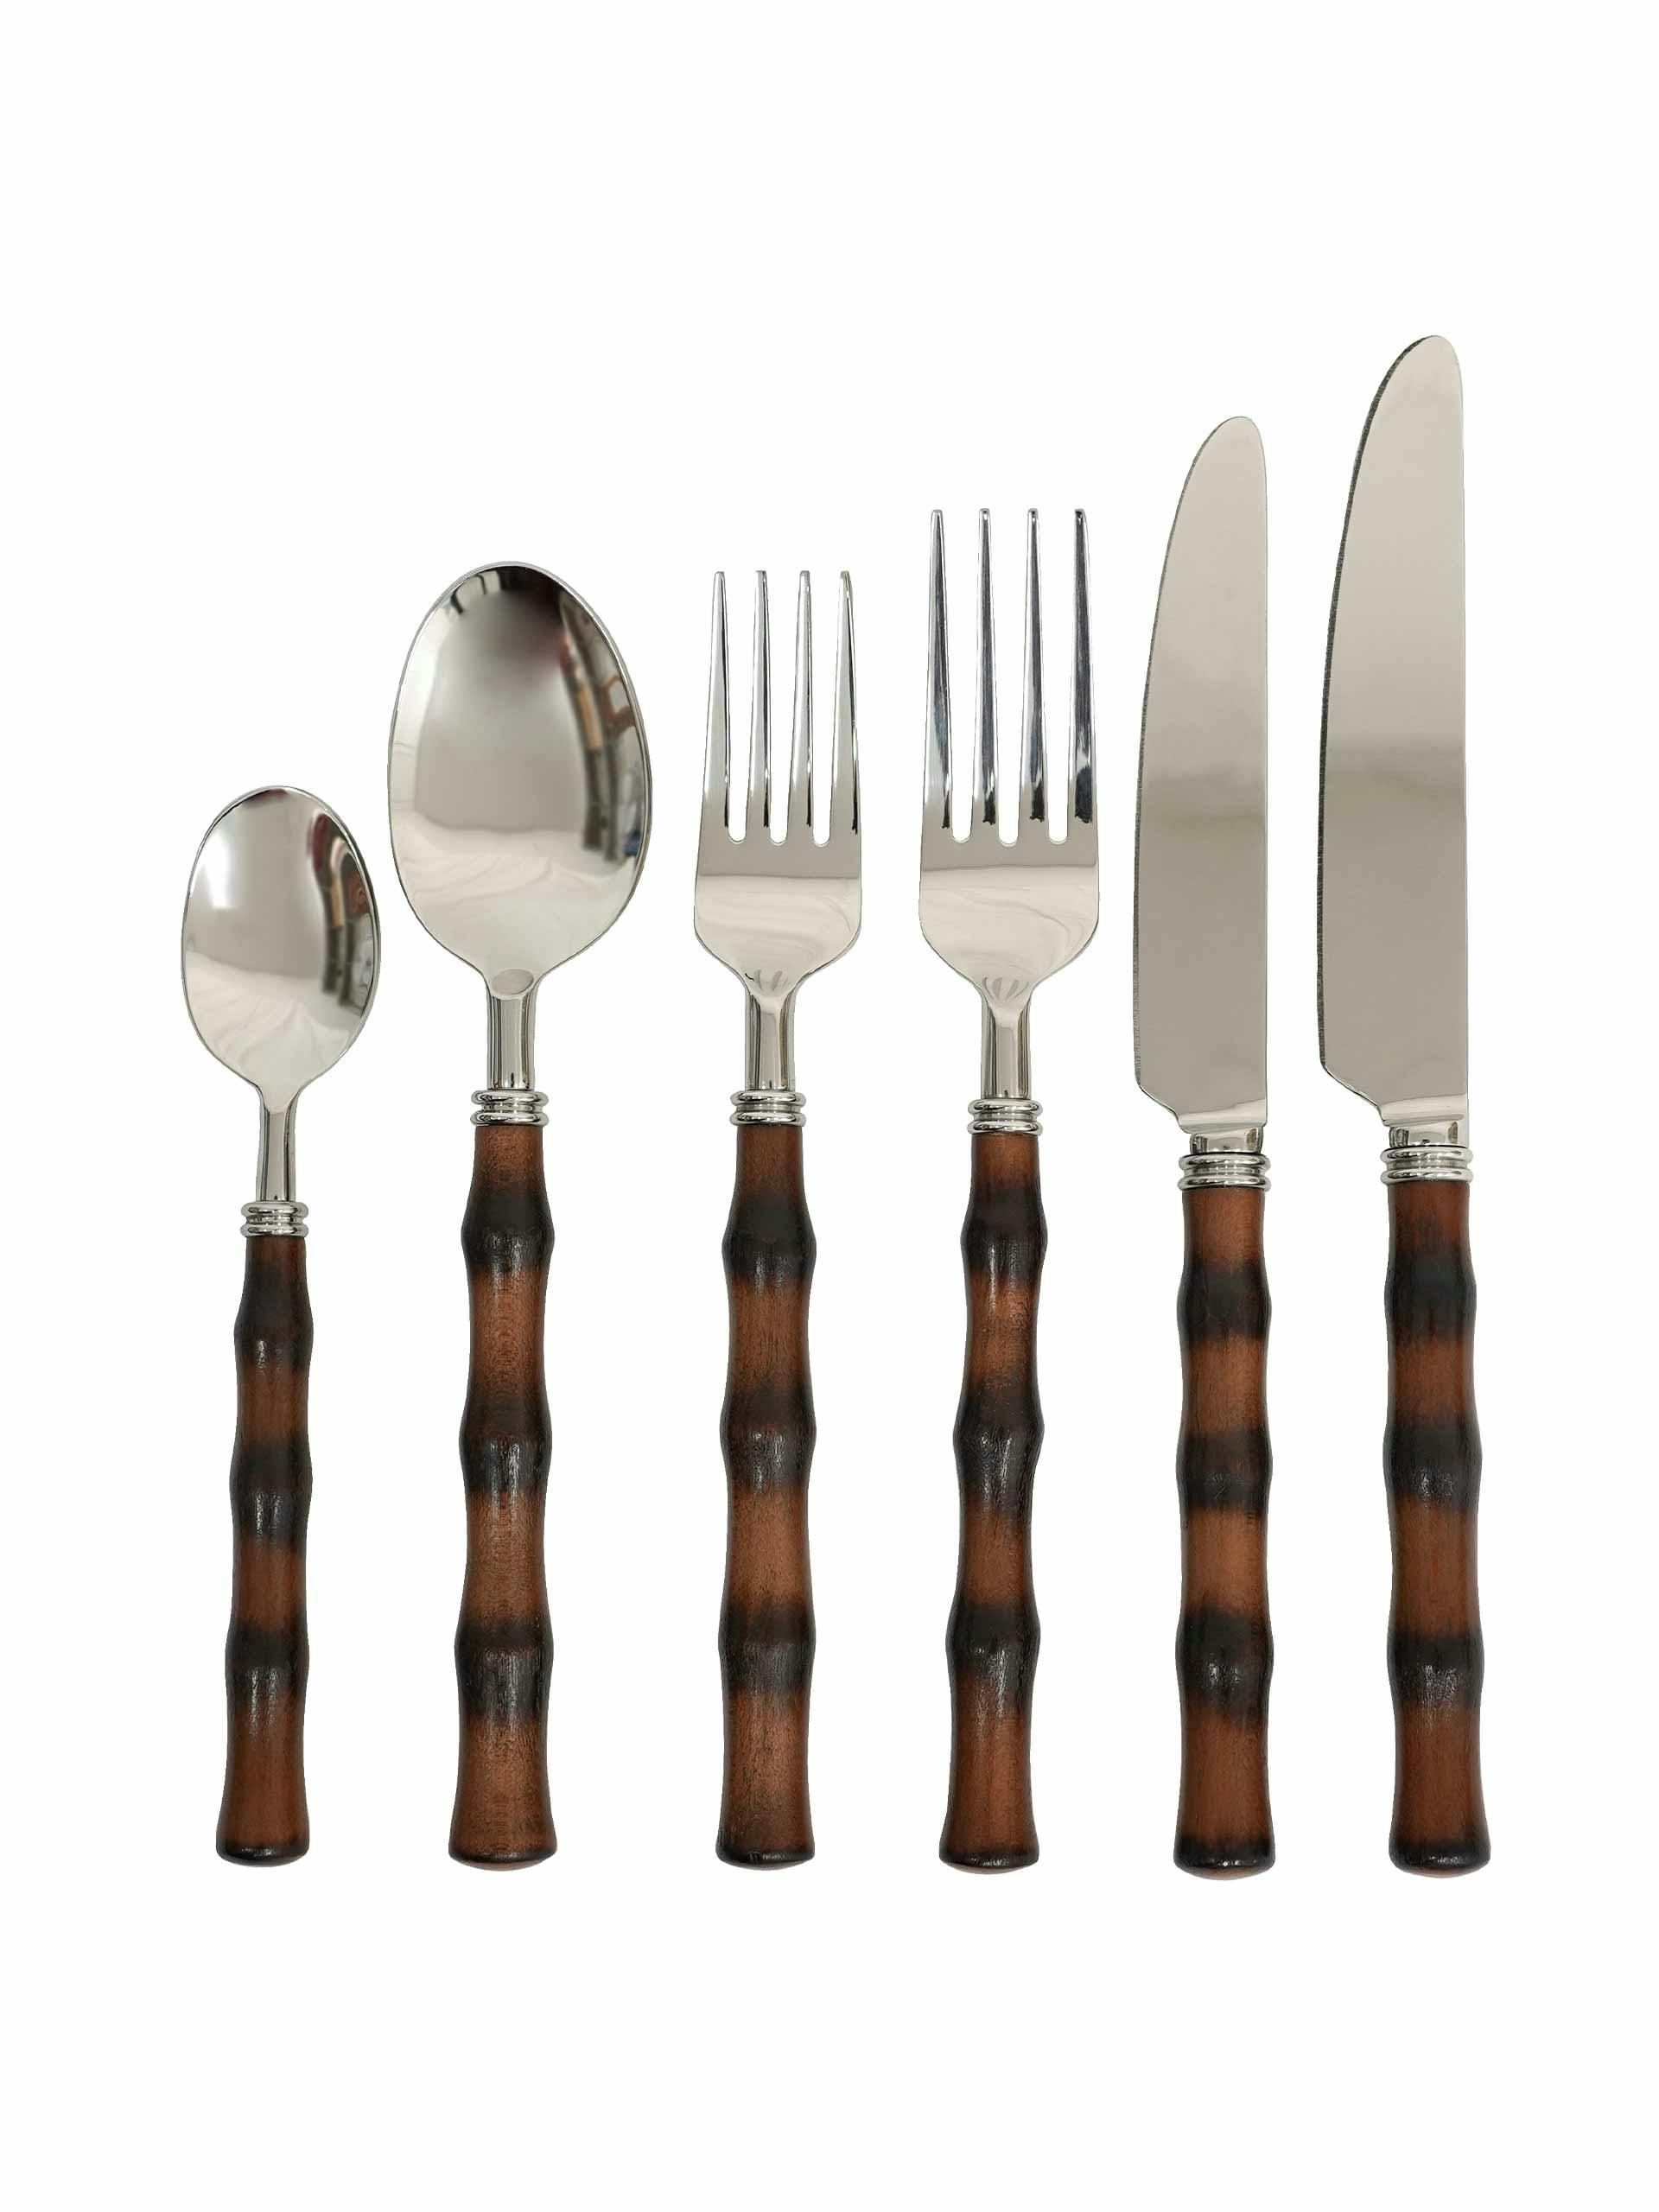 Handcrafted wooden cutlery (4 place settings of 6 pieces)